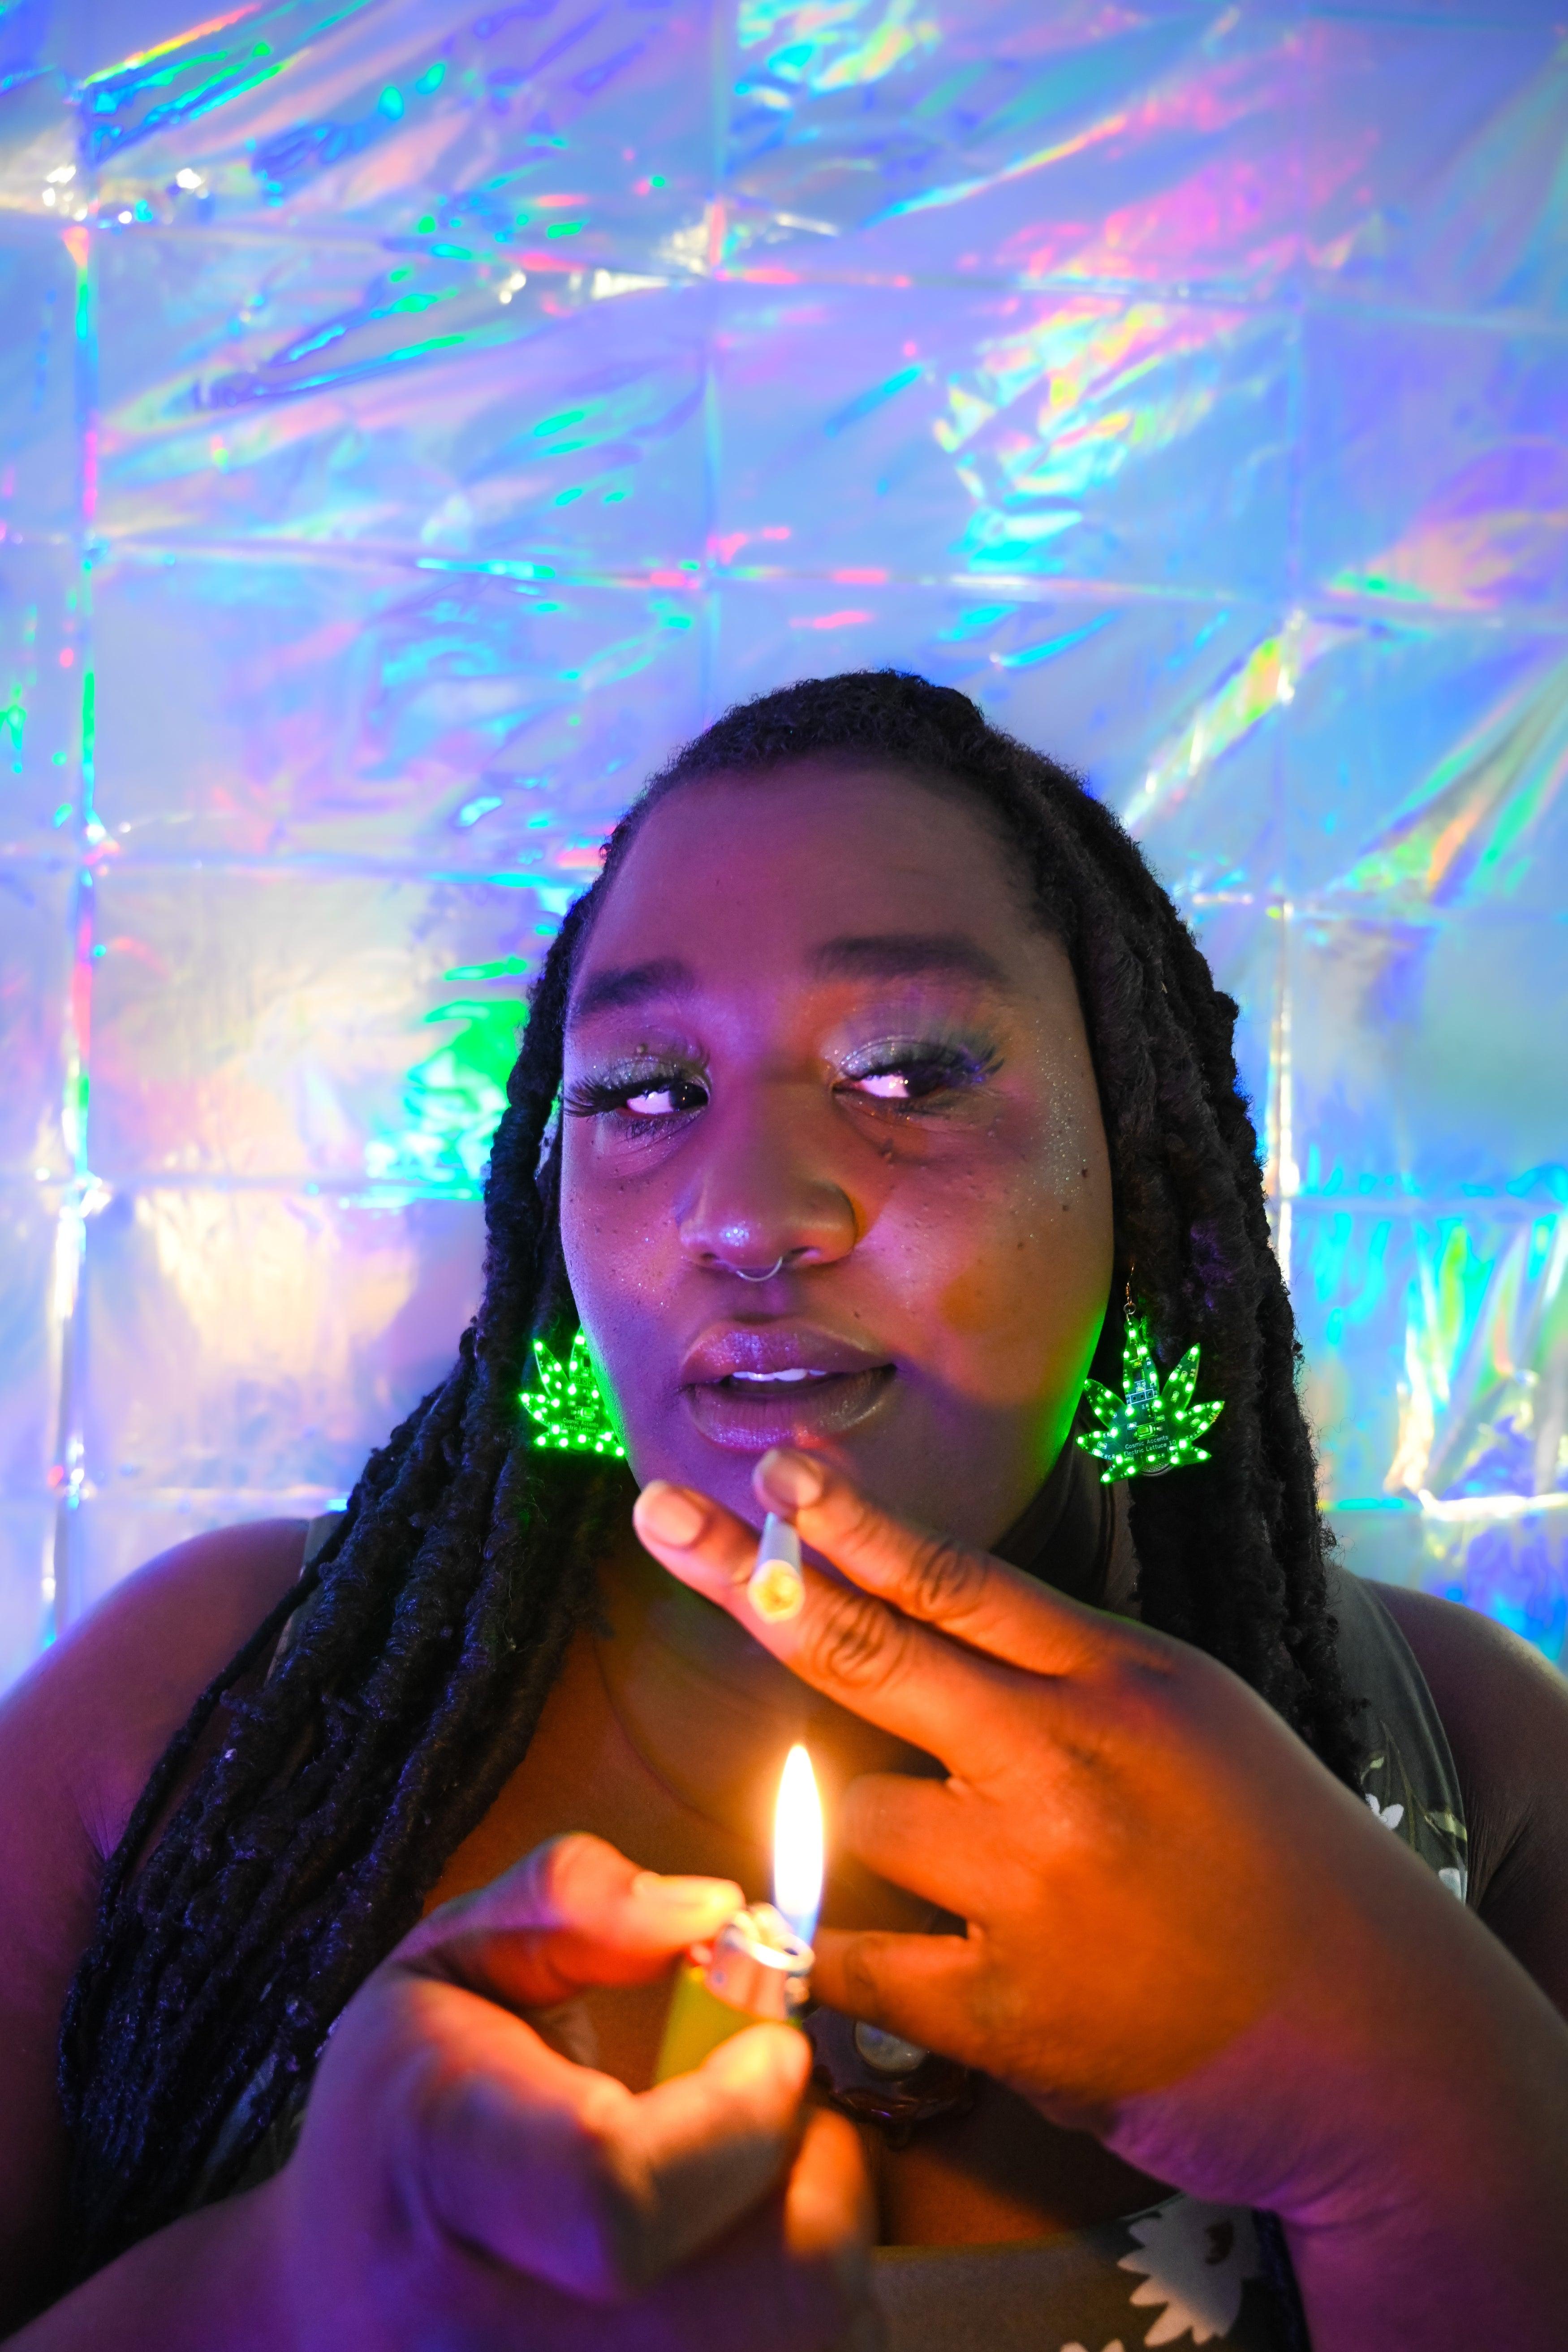 A young woman lights a joint while wearing marijuana-shaped LED earrings.